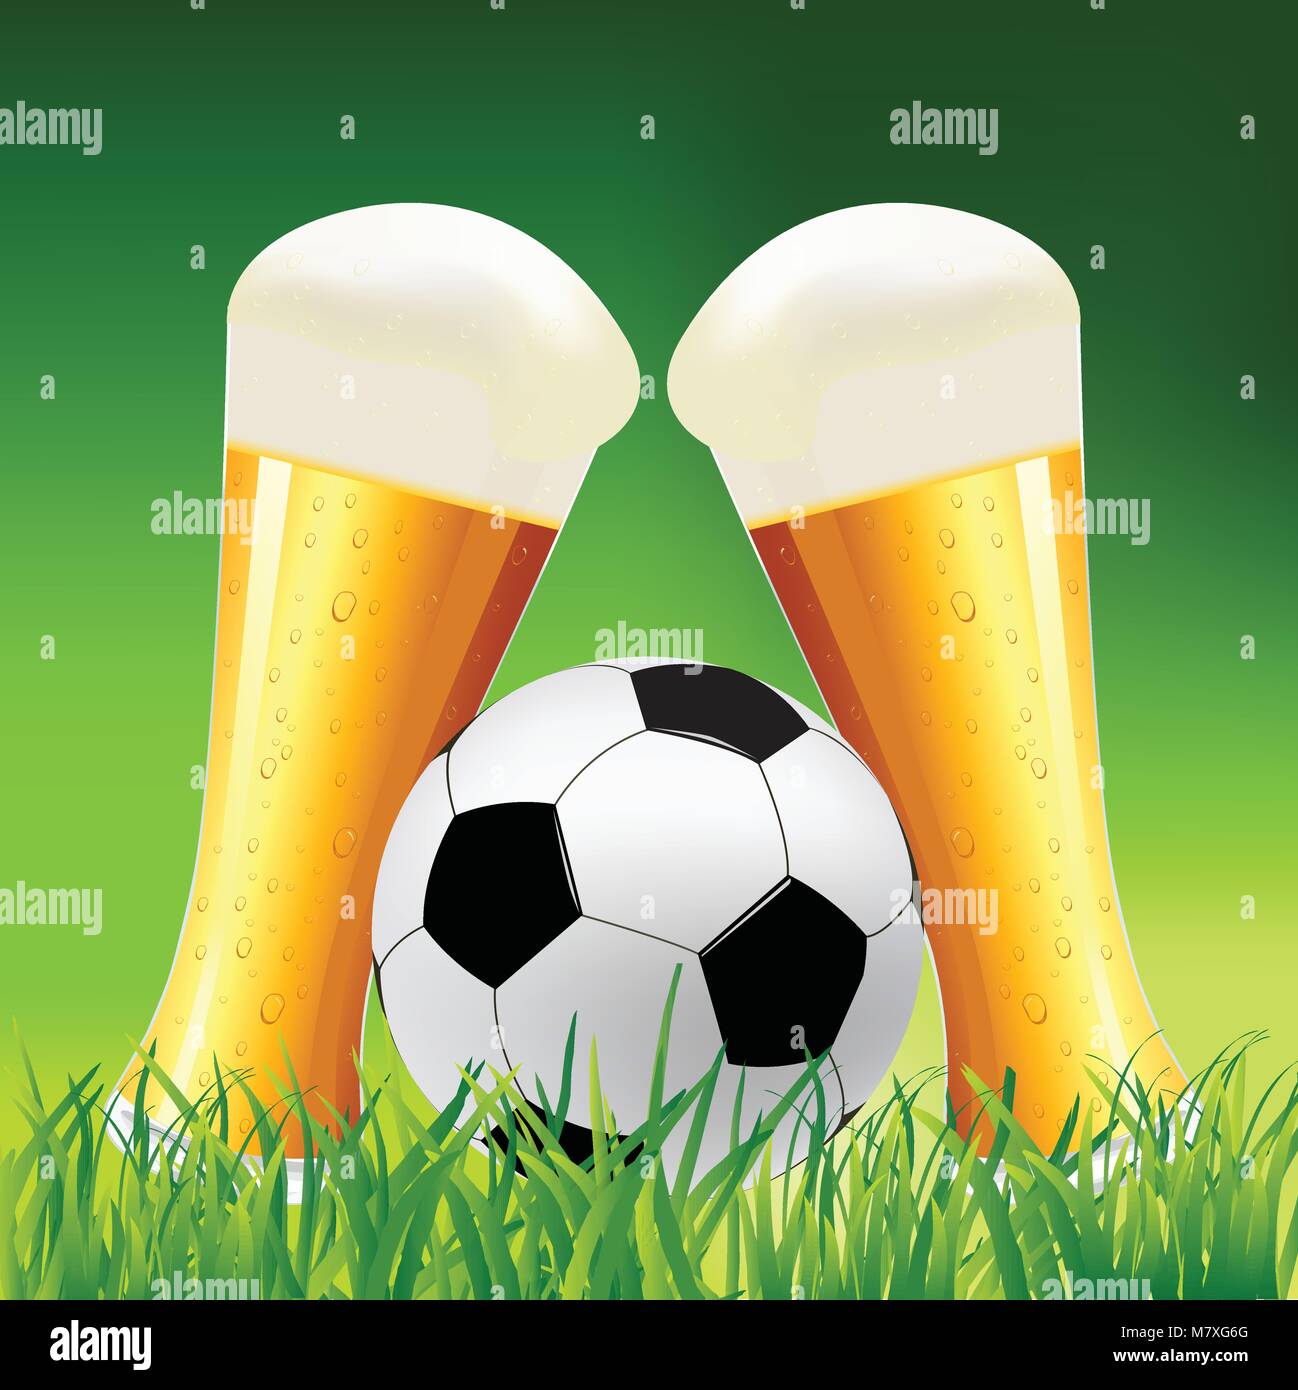 Beer glass and soccer ball on grass. Green soccer background illustration Stock Vector